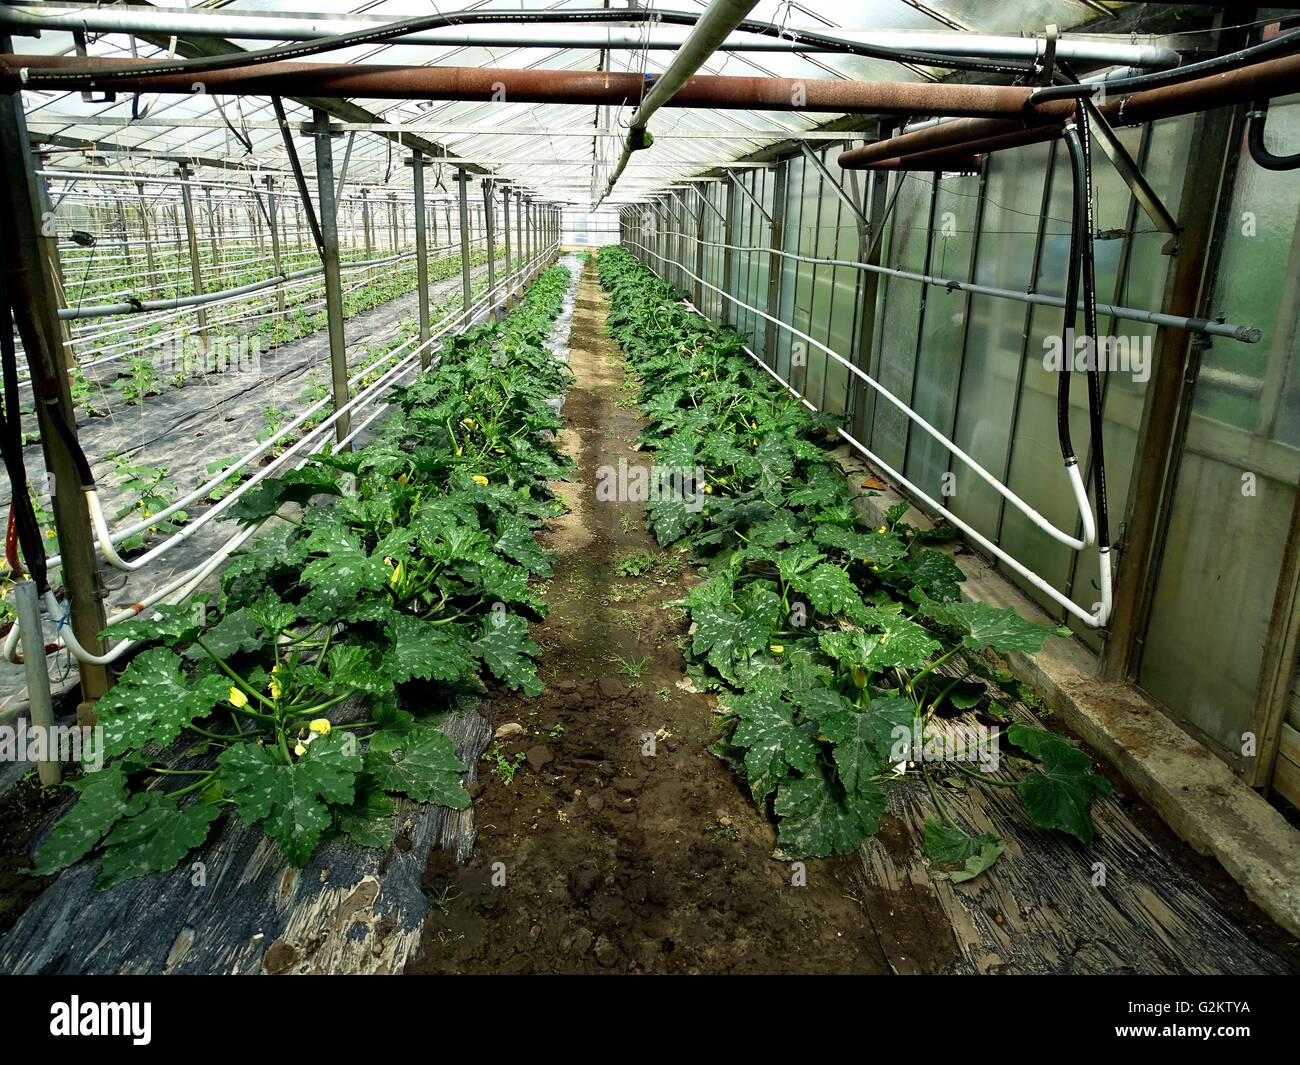 The Courgette Plants in the Line in the Farm Greenhouse Esser Photo  05/11/2016 lat. Cucurbita pepo subsp. pepo convar. giromontiina | usage worldwide Stock Photo